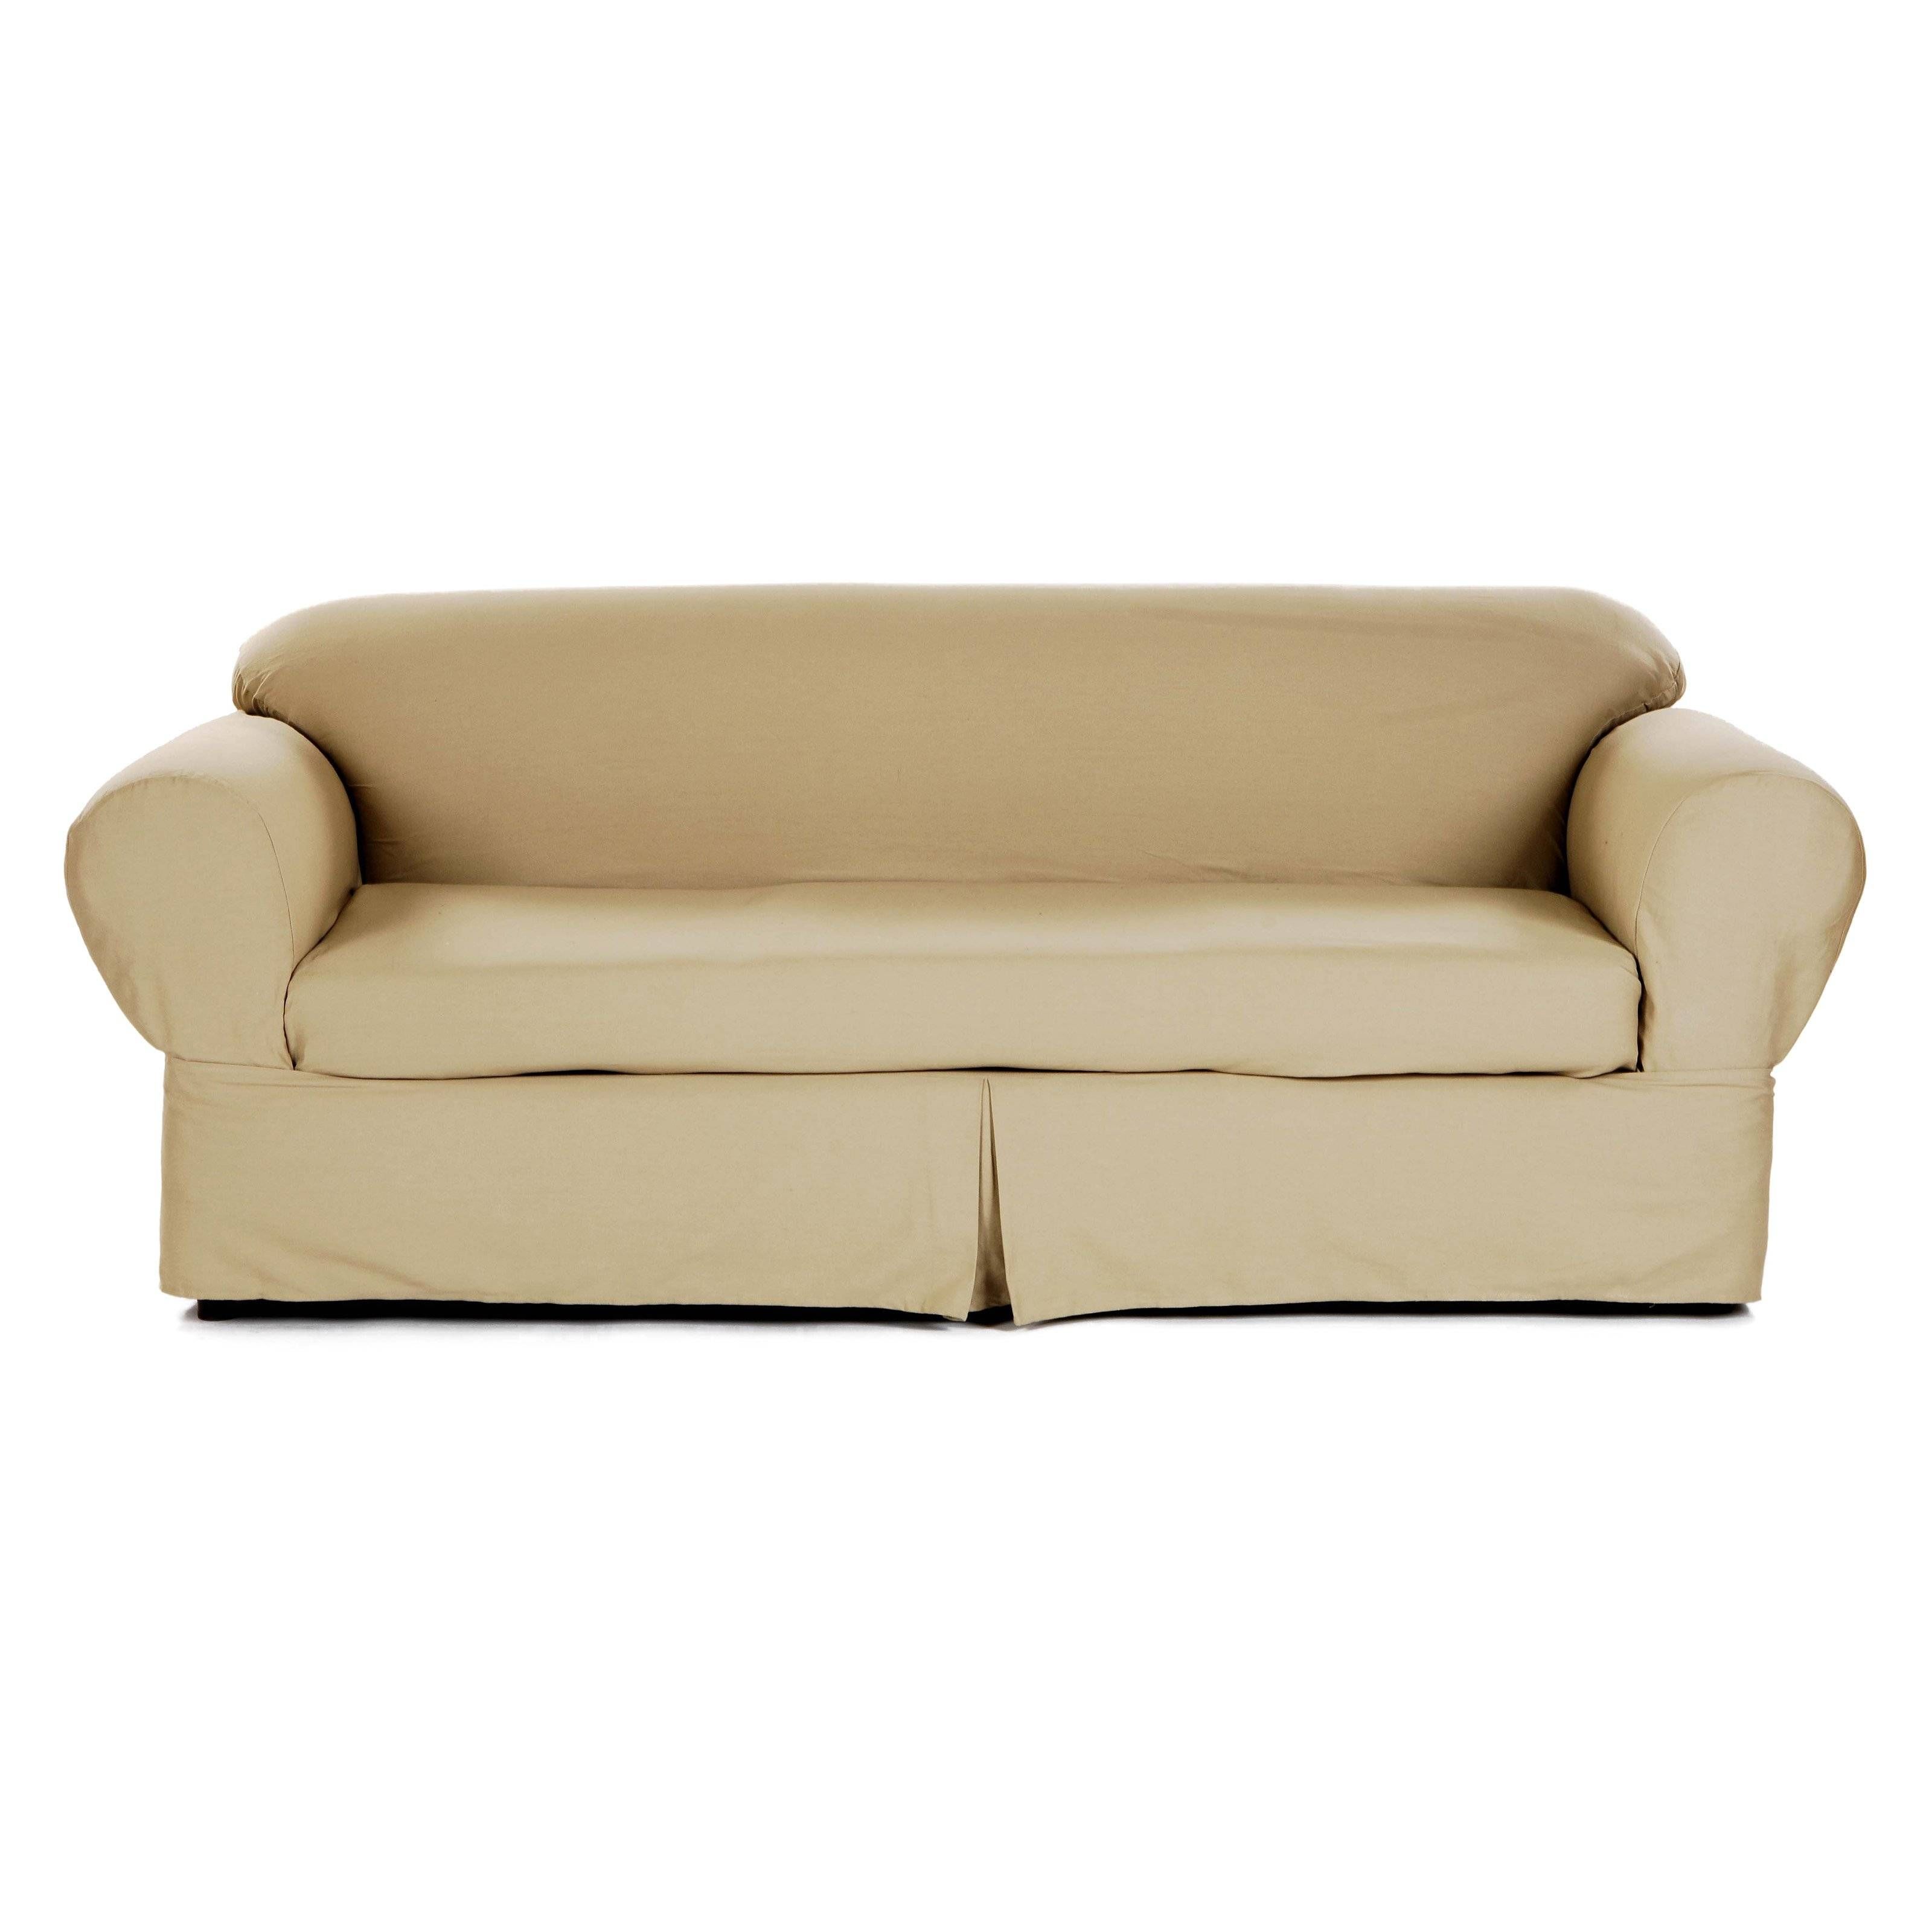 Classic Slipcovers Brushed Twill 2 Pc. Slipcover | Hayneedle In Slipcovers For Sofas And Chairs (Photo 30 of 30)